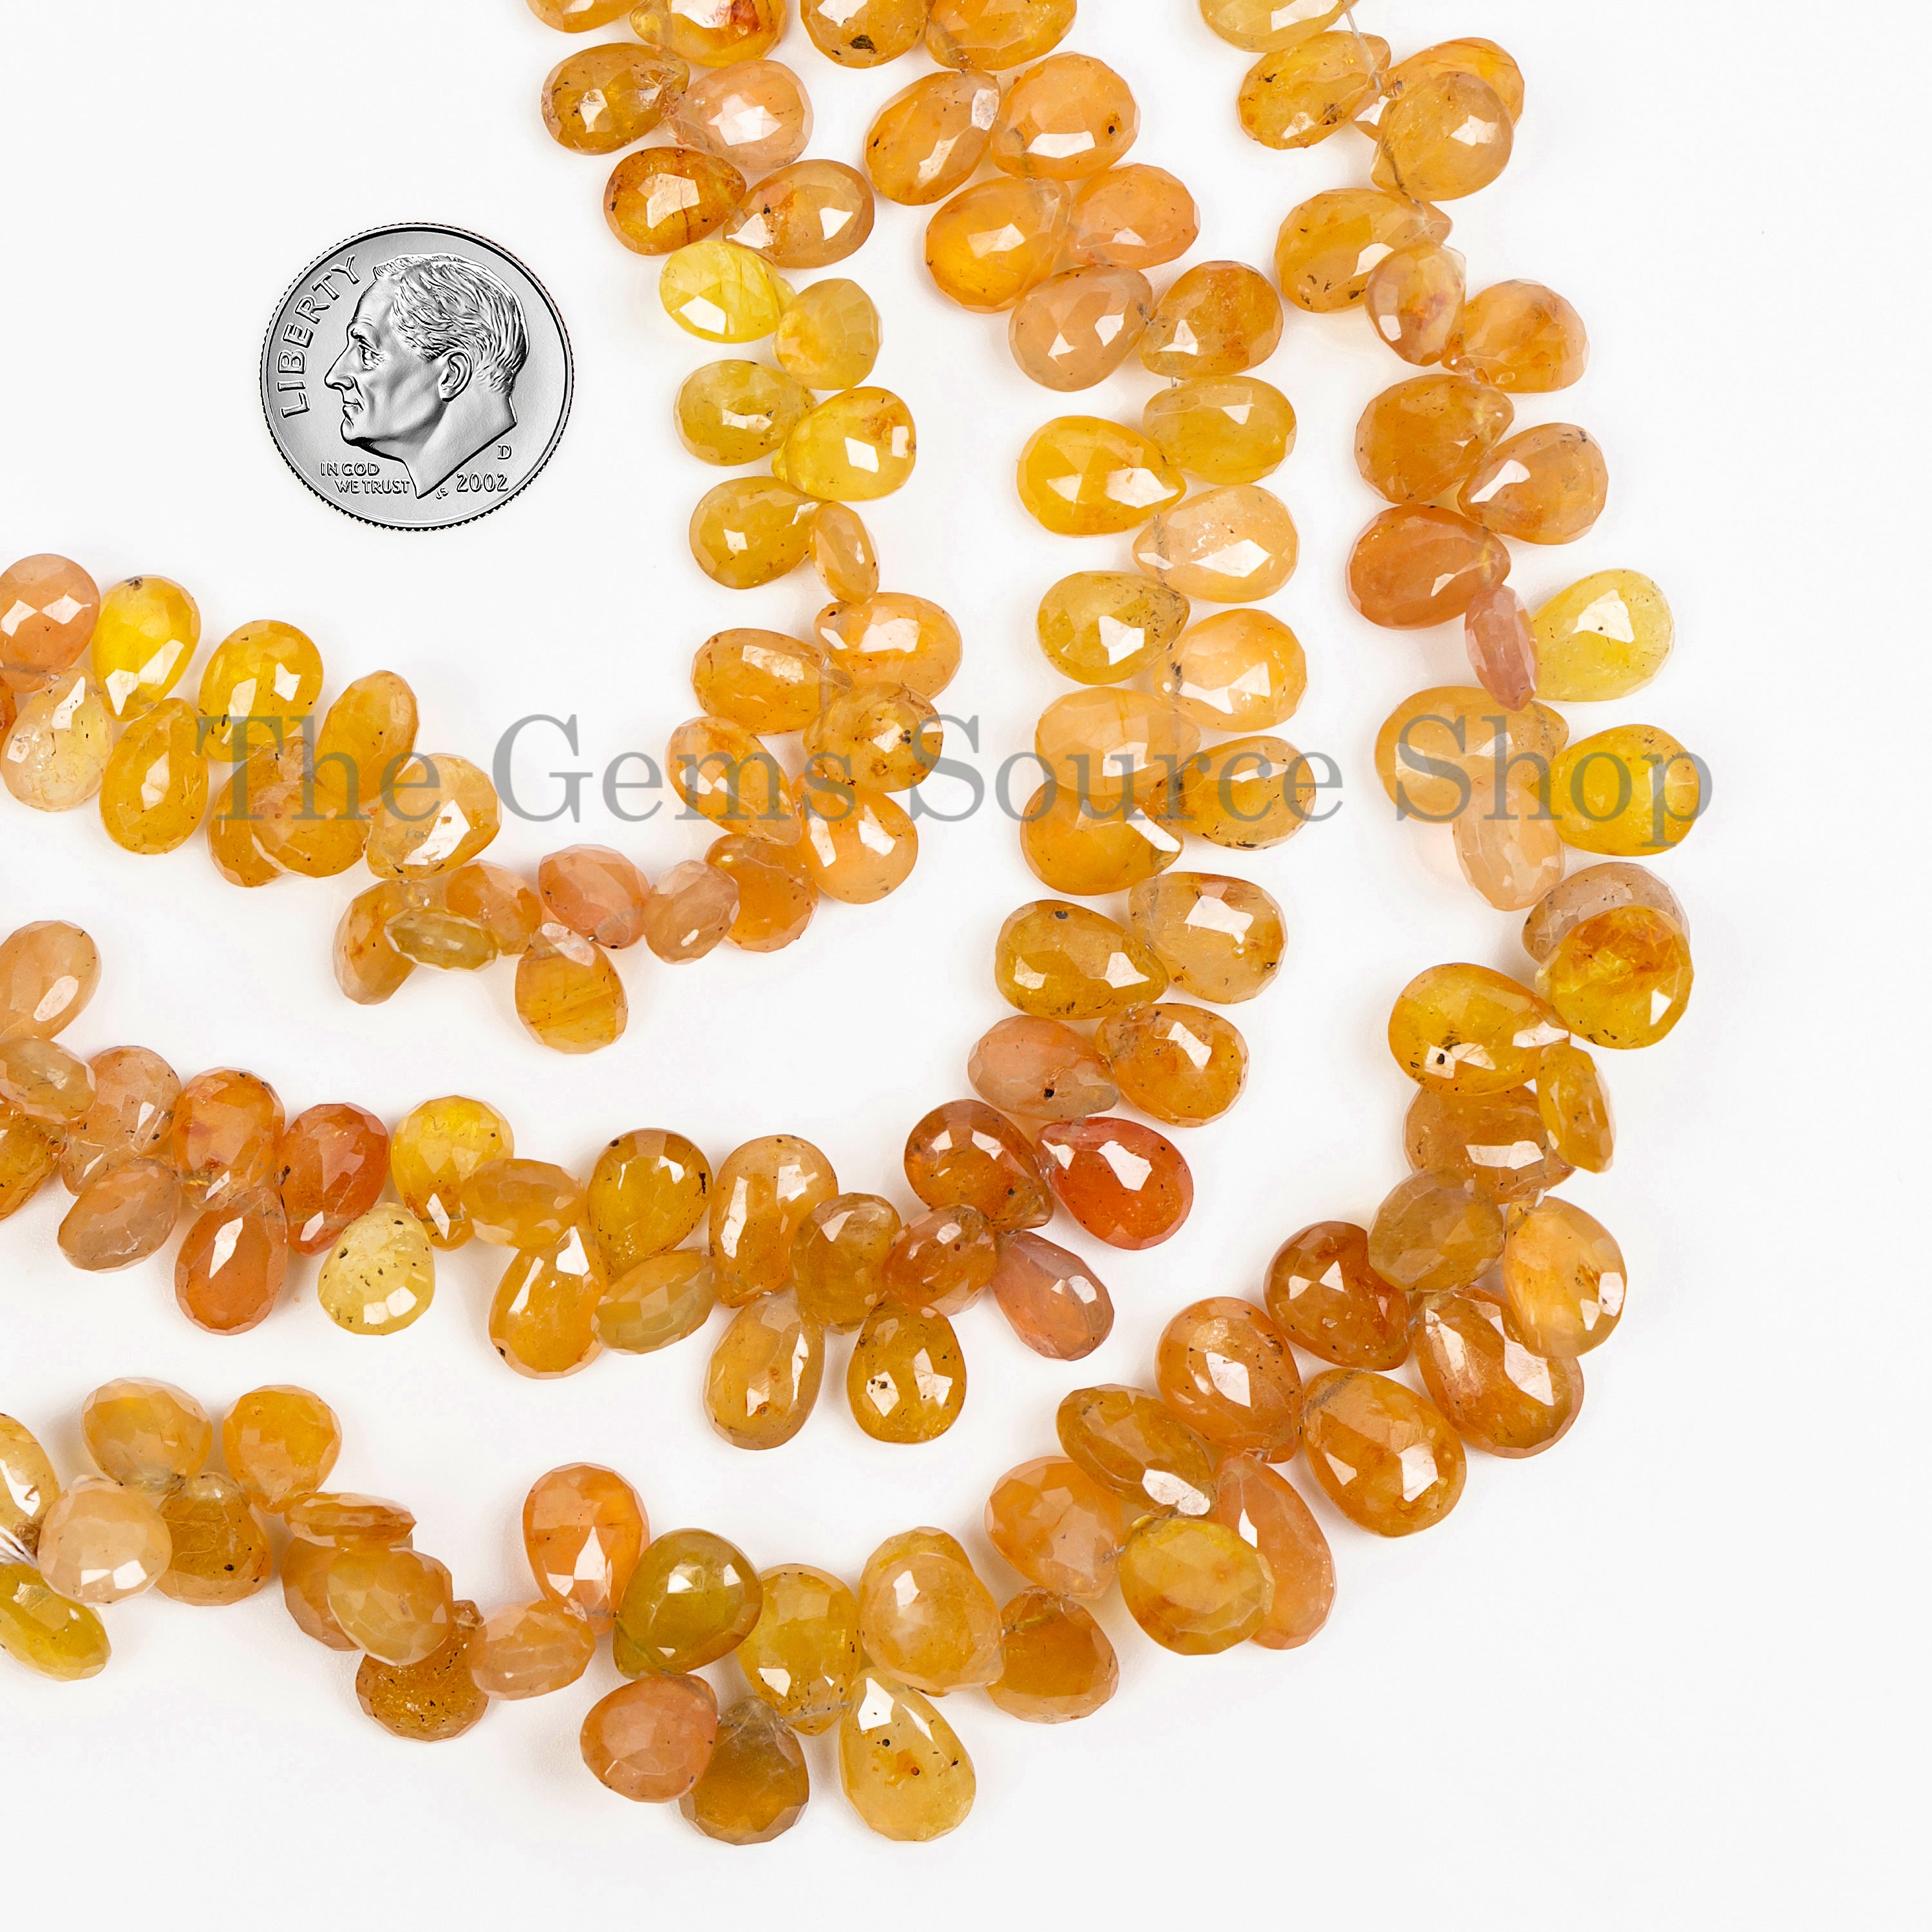 Yellow Sapphire Faceted Pear Beads, 6X8-8X11mm Natural Sapphire Pear Shape Beads for Jewelry Making. TGS-5049